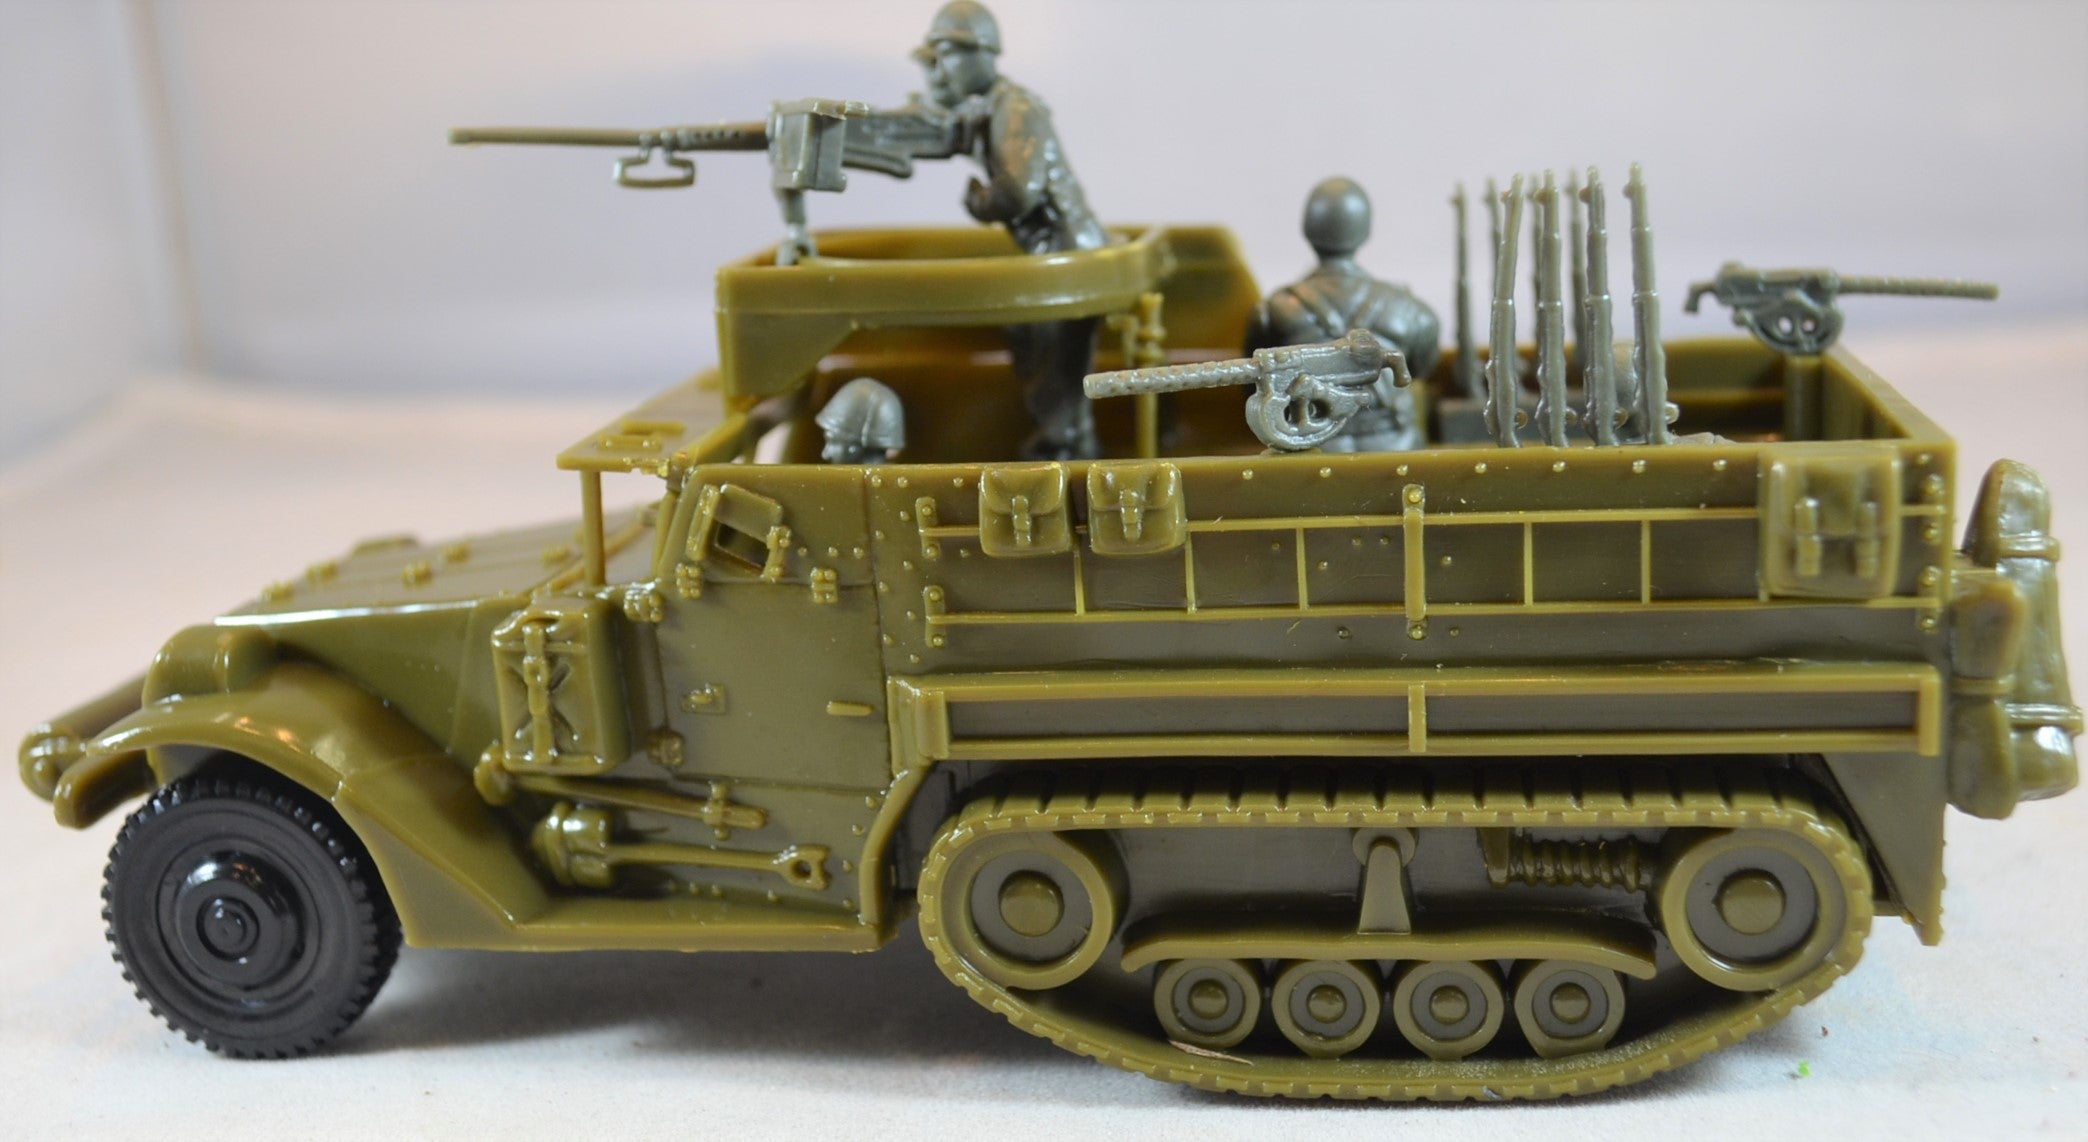  Tank/Half-Track (Qty 1, Style Varies) : Toys & Games